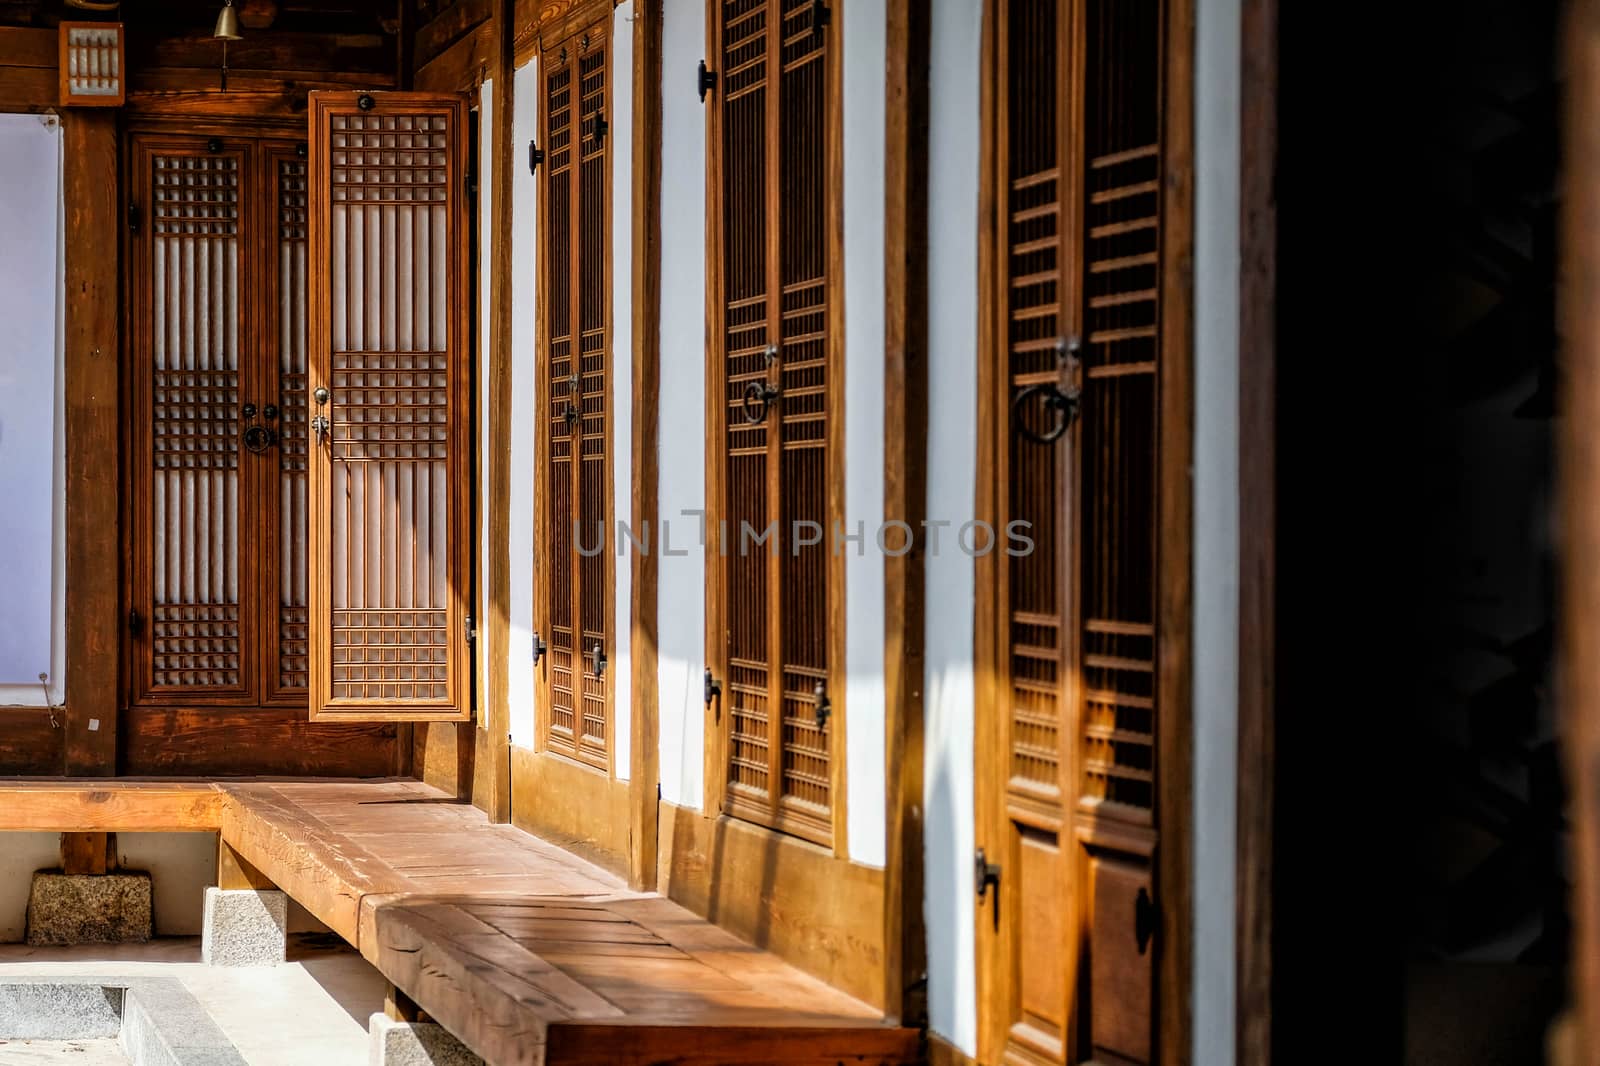 Detail and close up traditional Korean style architecture at Buk by Surasak